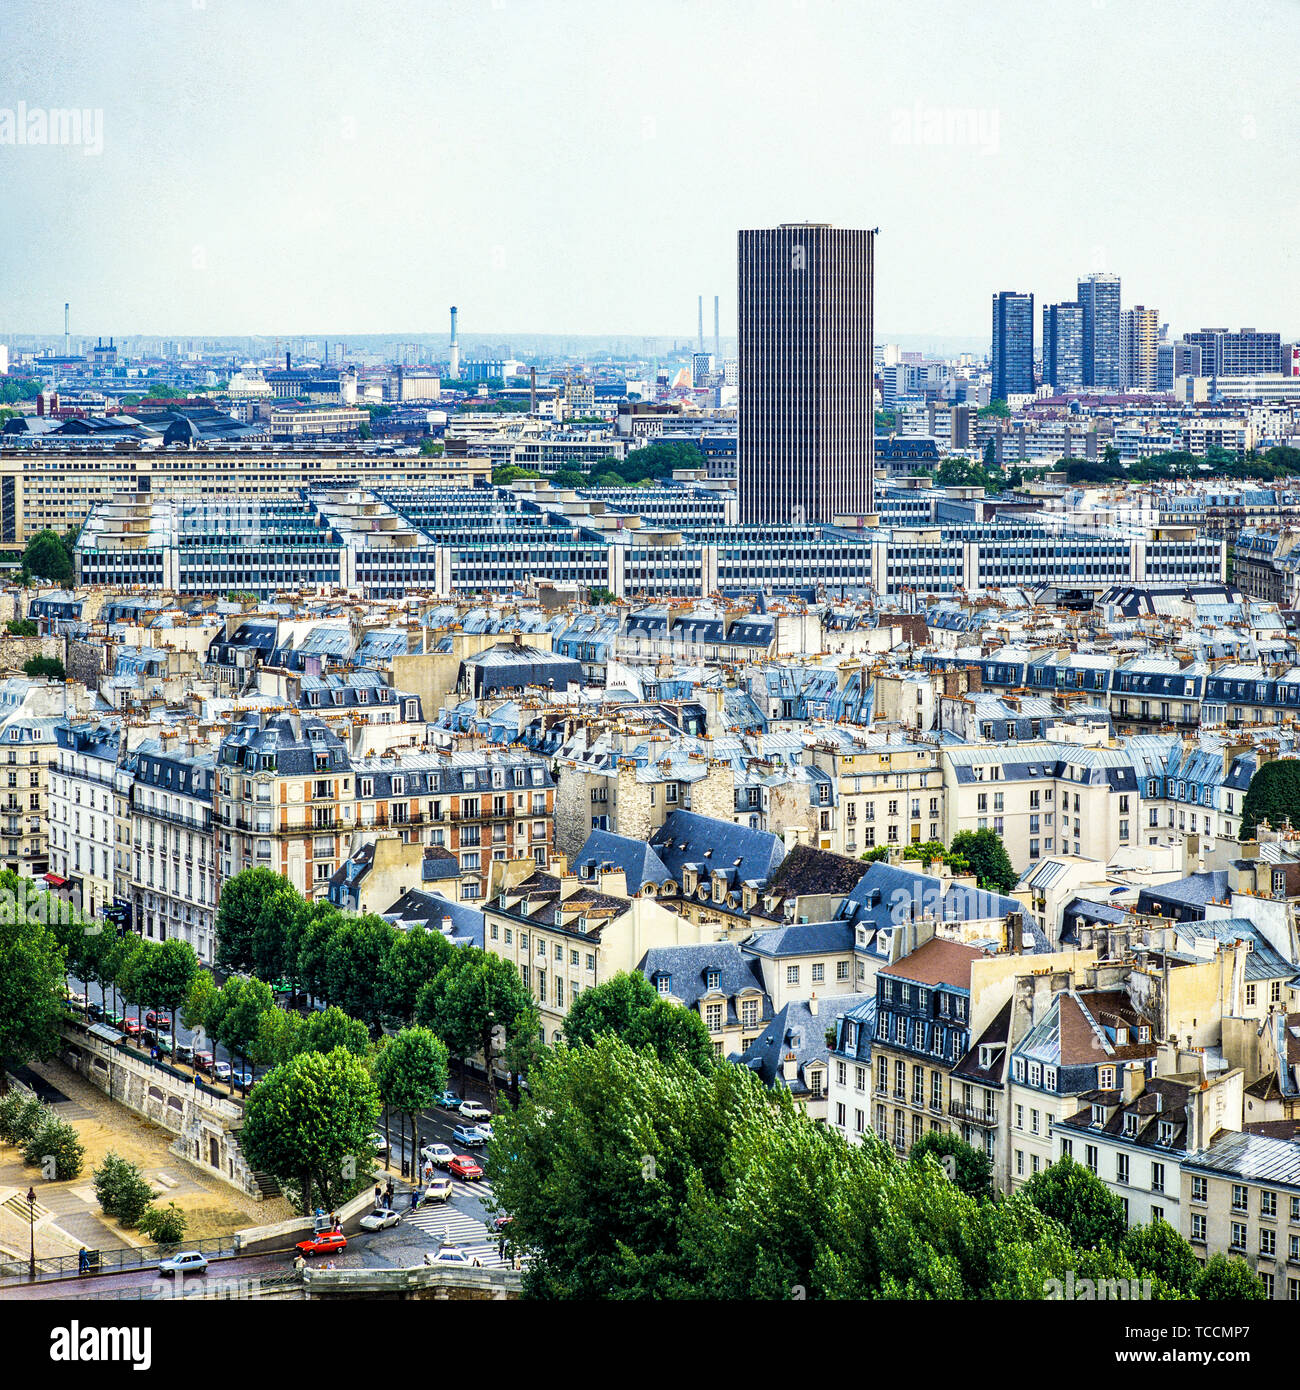 Overview of the city from Notre-Dame de Paris cathedral, Zamansky tower, aka Tour de Jussieu in the distance, left bank, Paris, France, Europe, Stock Photo